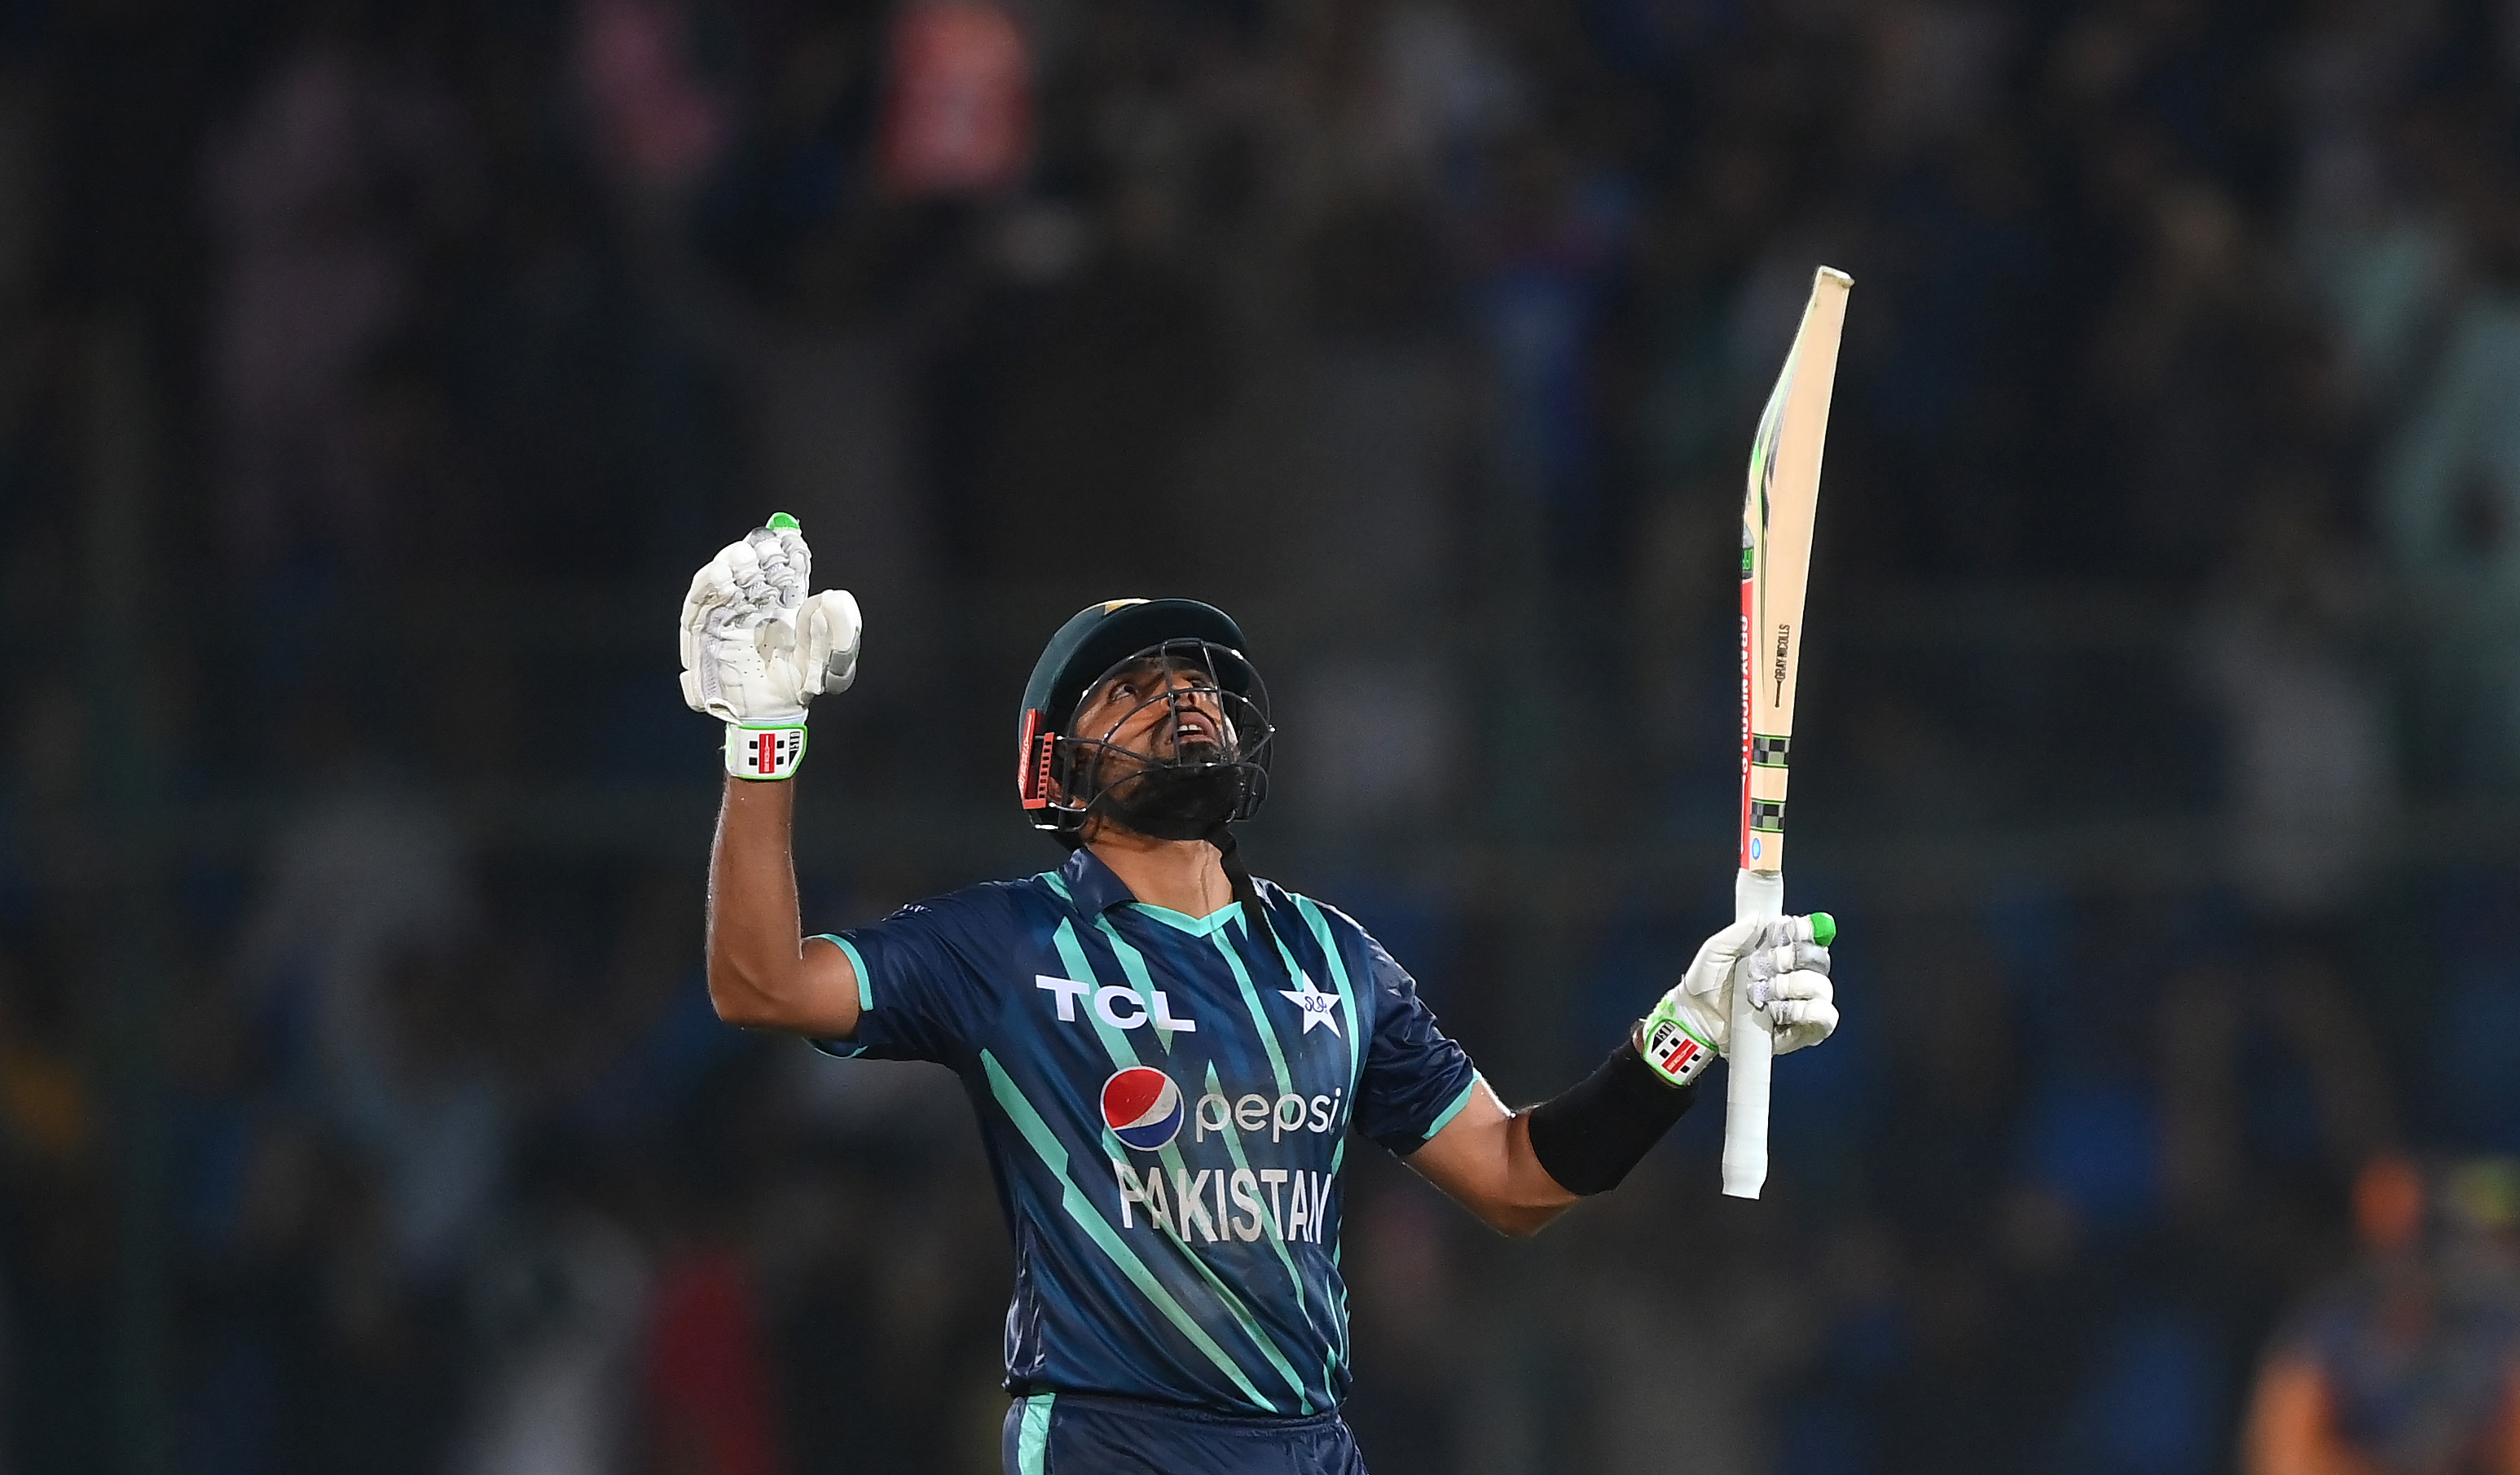 Babar Azam of Pakistan celebrates victory after the 2nd IT20 match between Pakistan and England on September 22, 2022 in Karachi, Pakistan. (Photo by Alex Davidson/Getty Images)